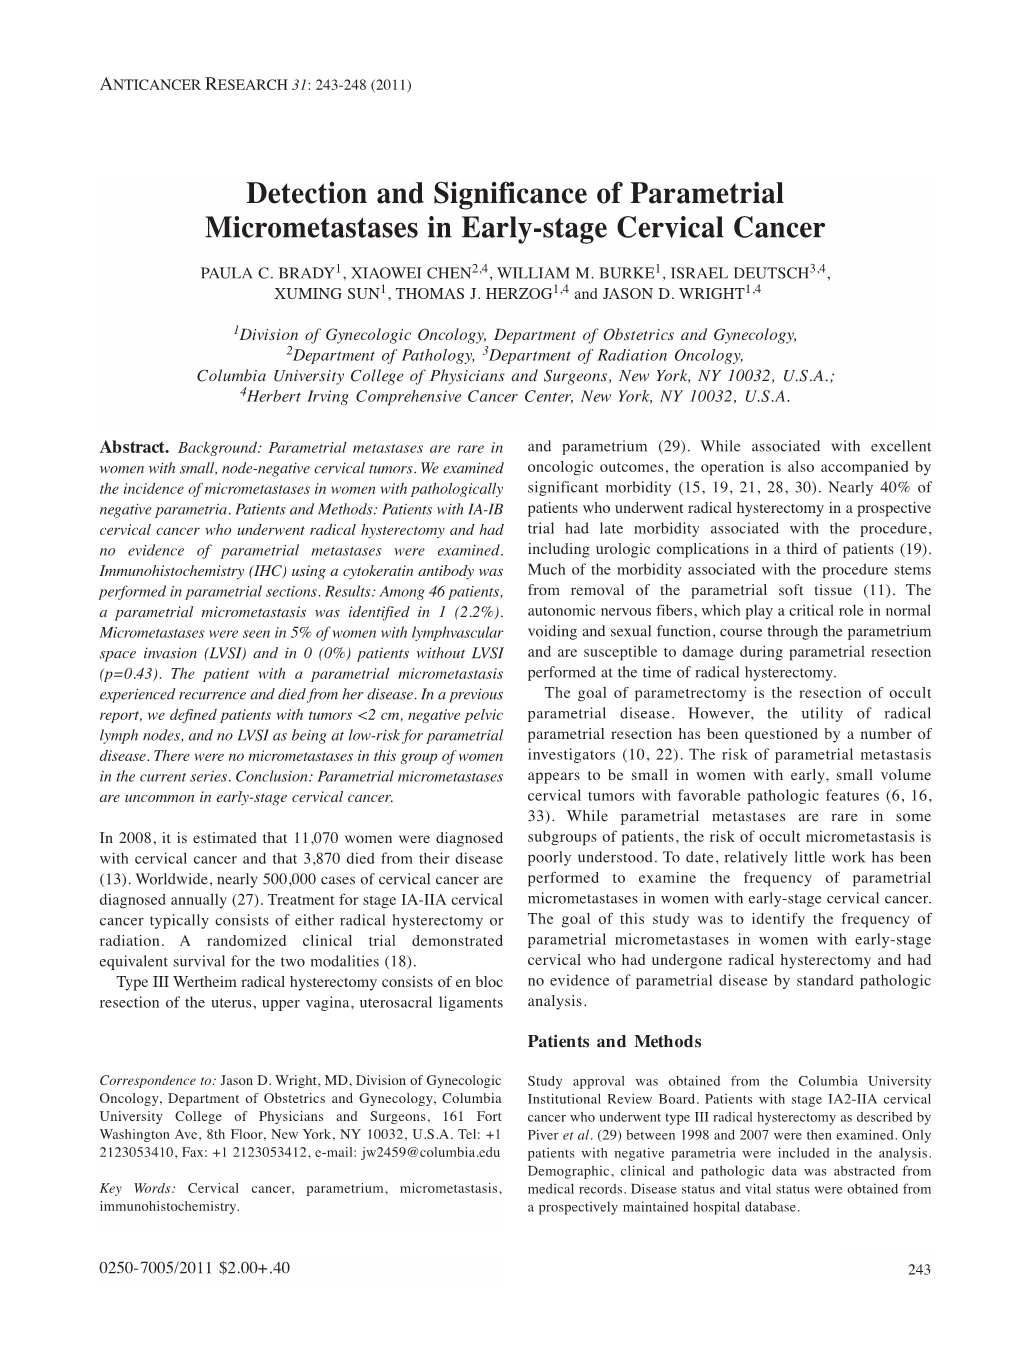 Detection and Significance of Parametrial Micrometastases in Early-Stage Cervical Cancer